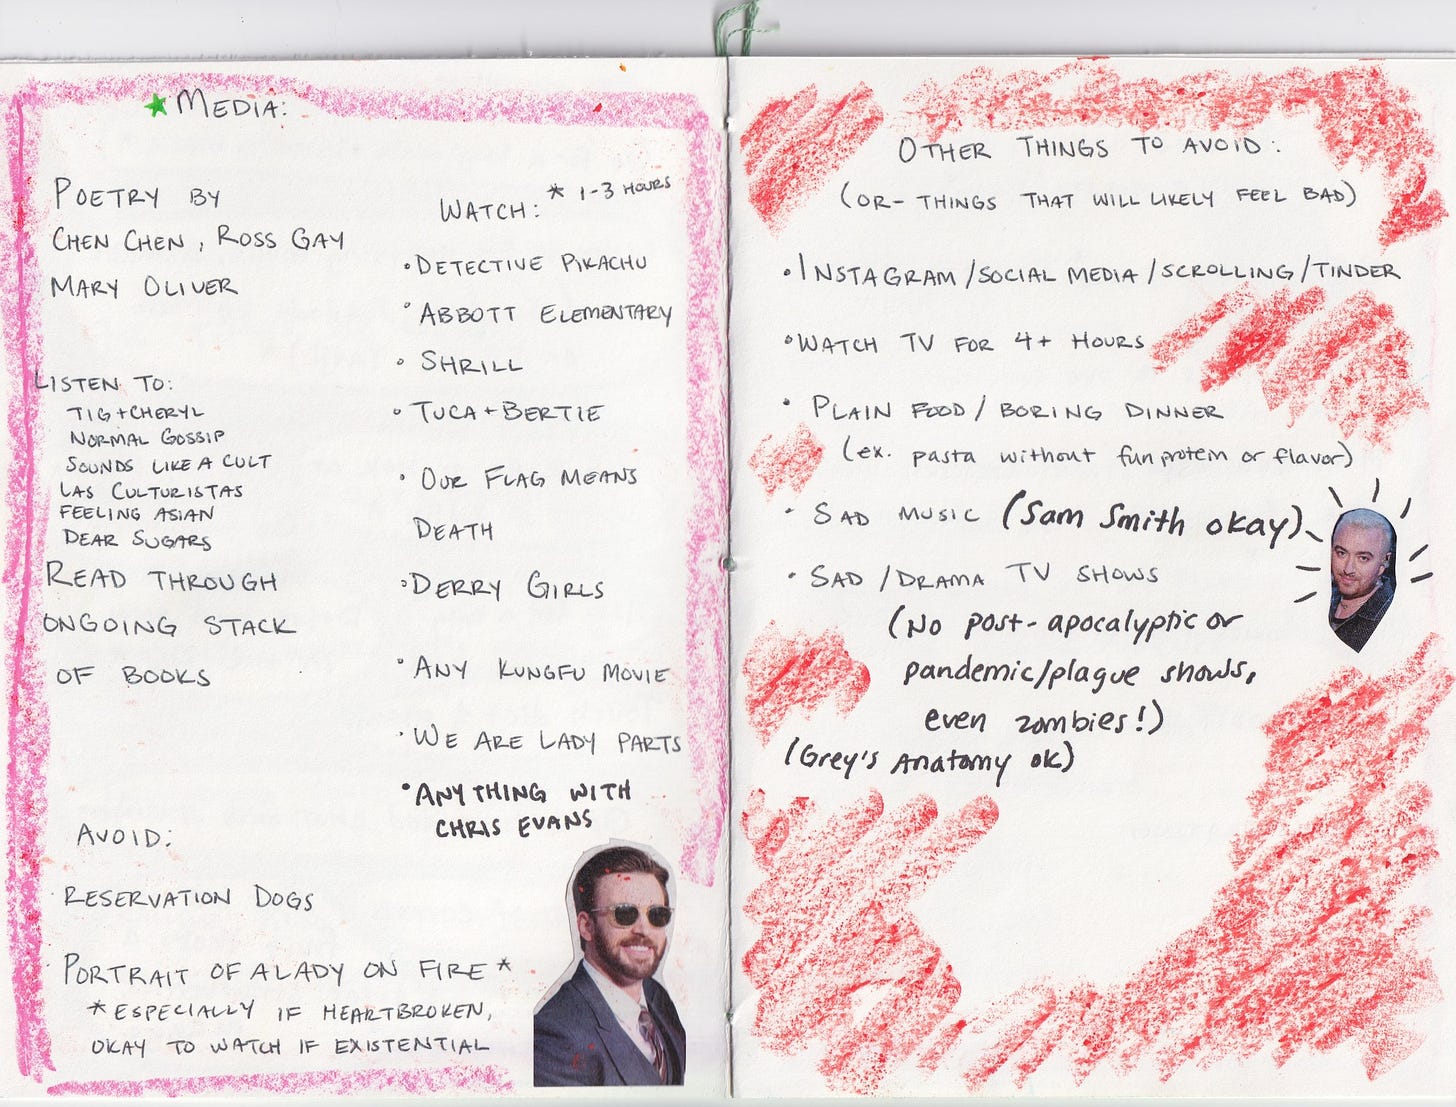 Pink crayon border, titled *MEDIA: POETRY by Chen Chen, Ross Gay, Mary Oliver Listen to: Tig & Cheryl, Normal Gossip, Sounds Like a Cult, Las Culturistas, Feeling Asian, Dear Sugars Read through ongoing stack of books Watch: (1-3 hours) of Detective Pikachu, Abbott Elementary, Shrill, Tuca & Bertie, Our Flag Means Death, Derry Girls, any kungfu movie, We are Lady Parts, anything with Chris Evans. (A photo of Chris Evans wearing sunglasses is collaged into the corner).  Avoid: Reservation Dogs, Portrait of Lady on Fire (especially if heartbroken, okay to watch if existential)  Other things to avoid: (or things that will likely feel bad) Instagram/social media/scrolling/tinder, watch TV for more than four hours, plain food/boring dinner (like pasta without fun protein or flavor), sad music (Sam Smith is okay), sad/drama TV shows (no post-apocalyptic or pandemic/plague shows, even zombies!) (Grey’s anatomy okay)